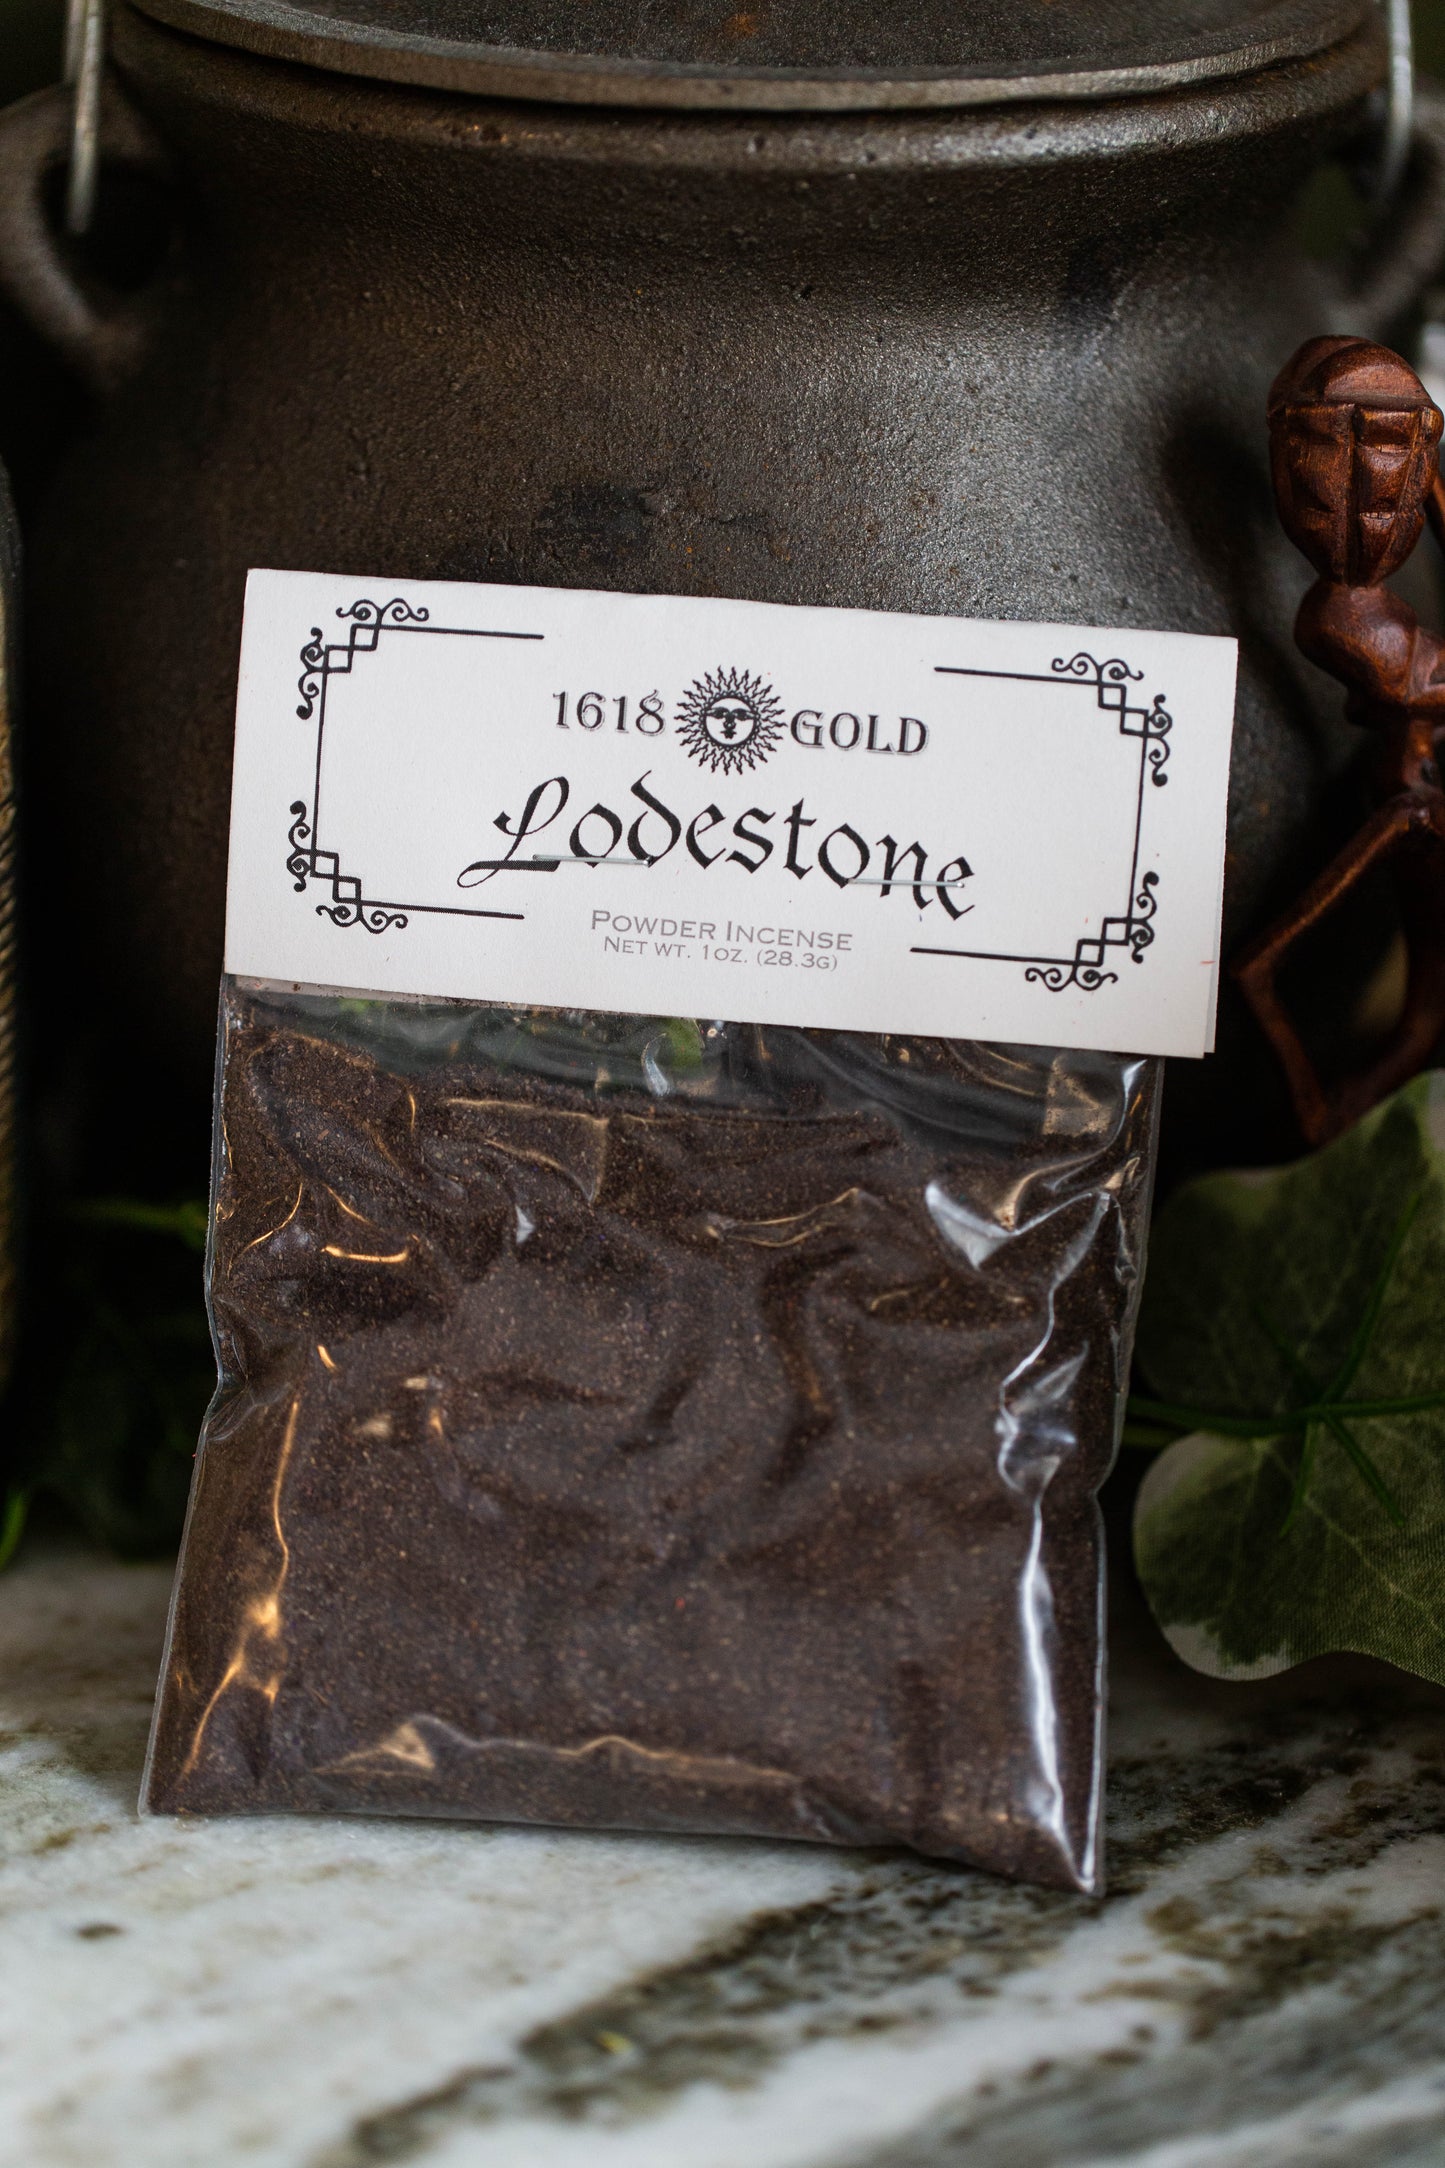 1618 Gold - LODESTONE - Powder Incense for inspiration, influence, attraction, magnetism, manifestation